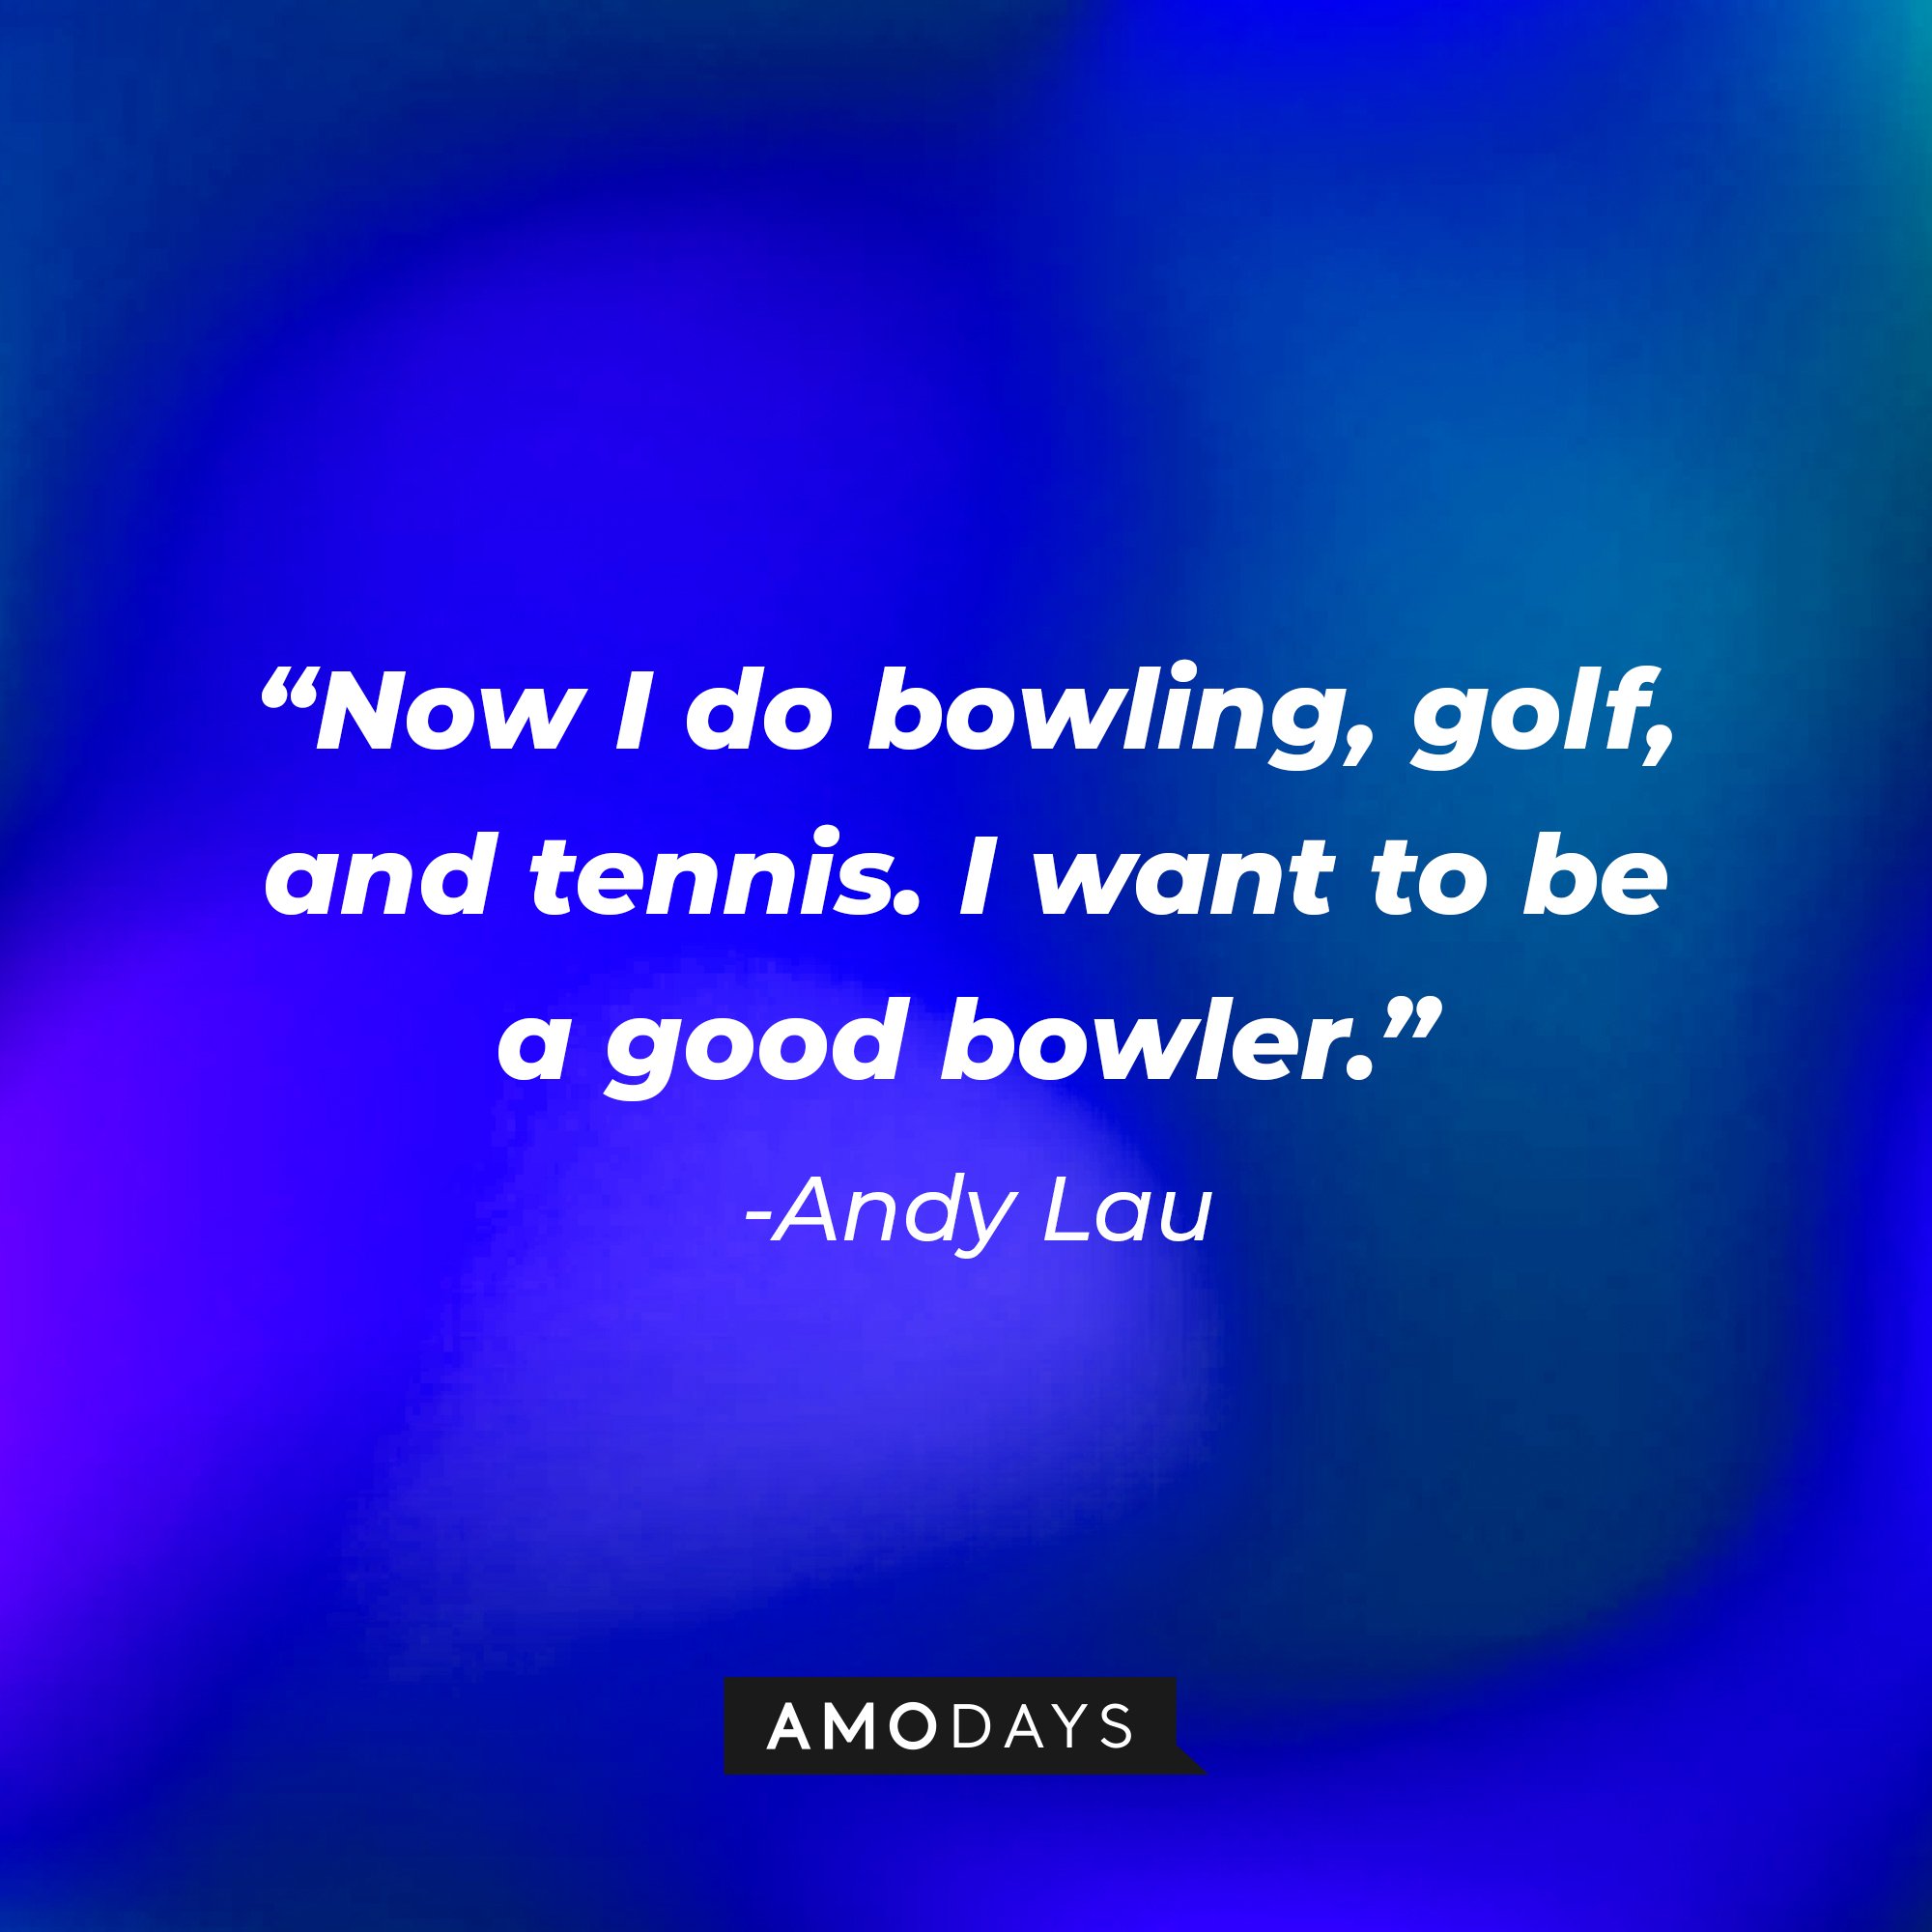 Andy Lau's quote: "Now I do bowling, golf, and tennis. I want to be a good bowler." | Image: AmoDays